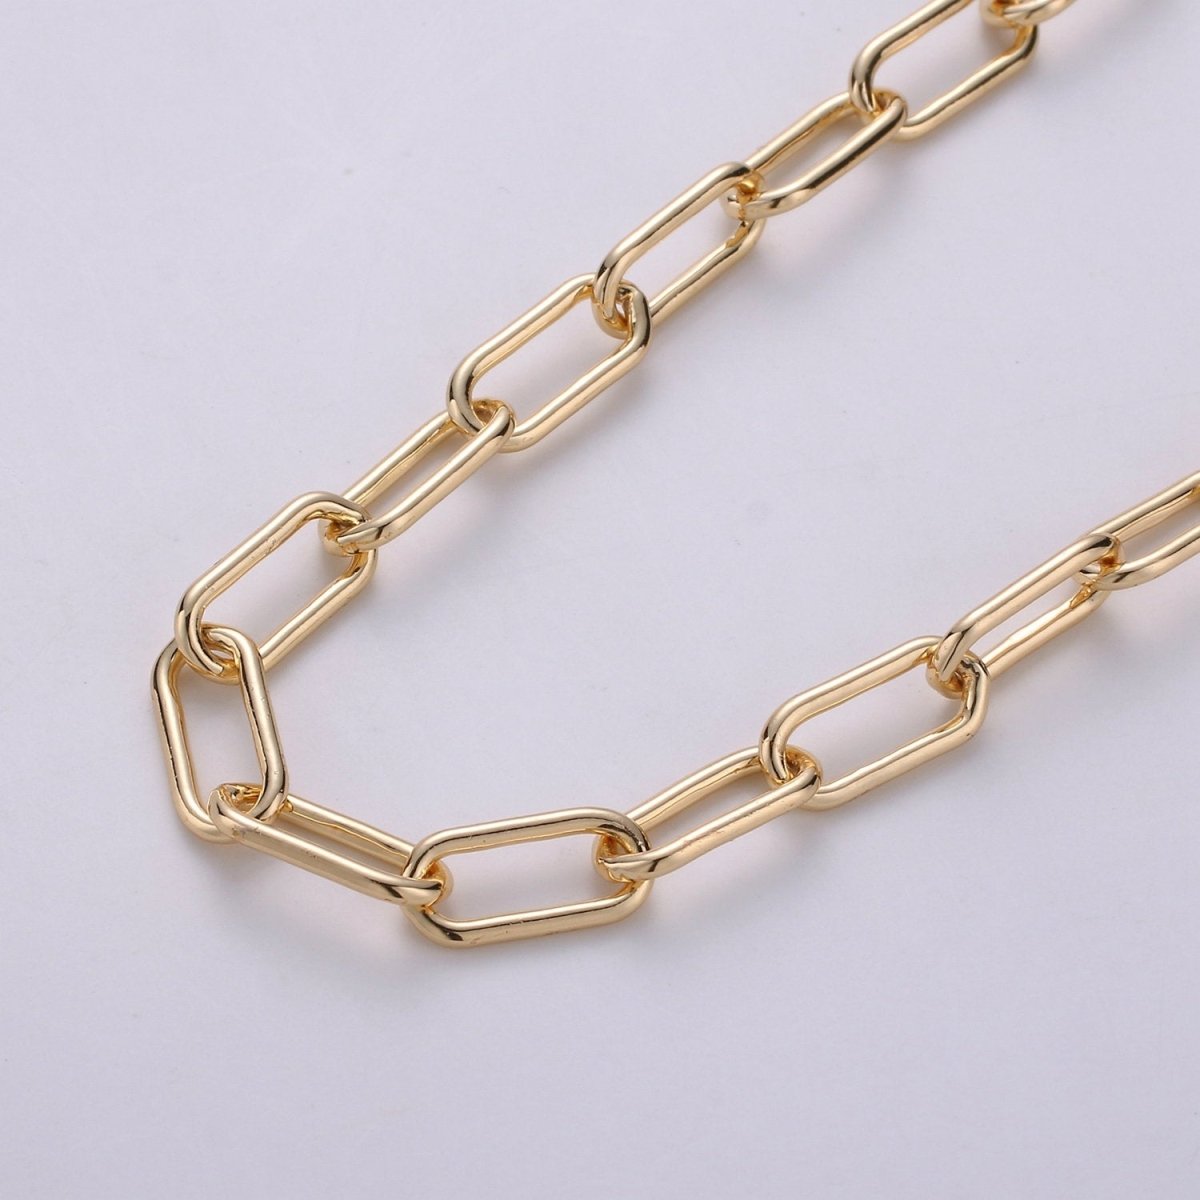 Paperclip Chain Necklace, 16K Gold Filled Paper Clip Chain 7.5x16.5mm, Nickel Free Unfinished Link Chain | ROLL-272 Clearance Pricing - DLUXCA